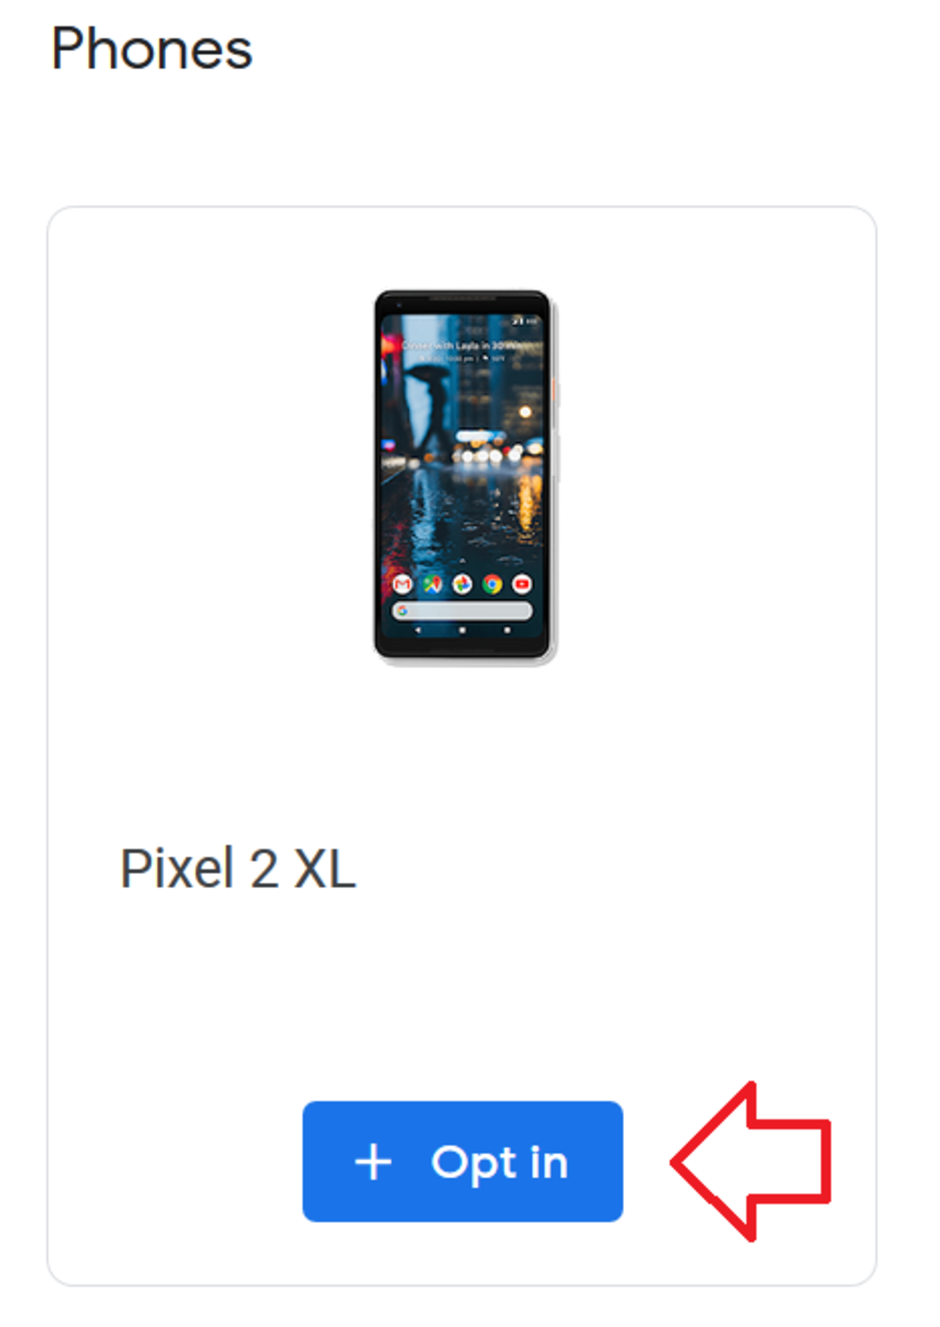 Some Pixel 2 XL models are experiencing a bootloop after updating to Android Q Beta 4 - Android Q Beta 4 bricks some Pixel phones